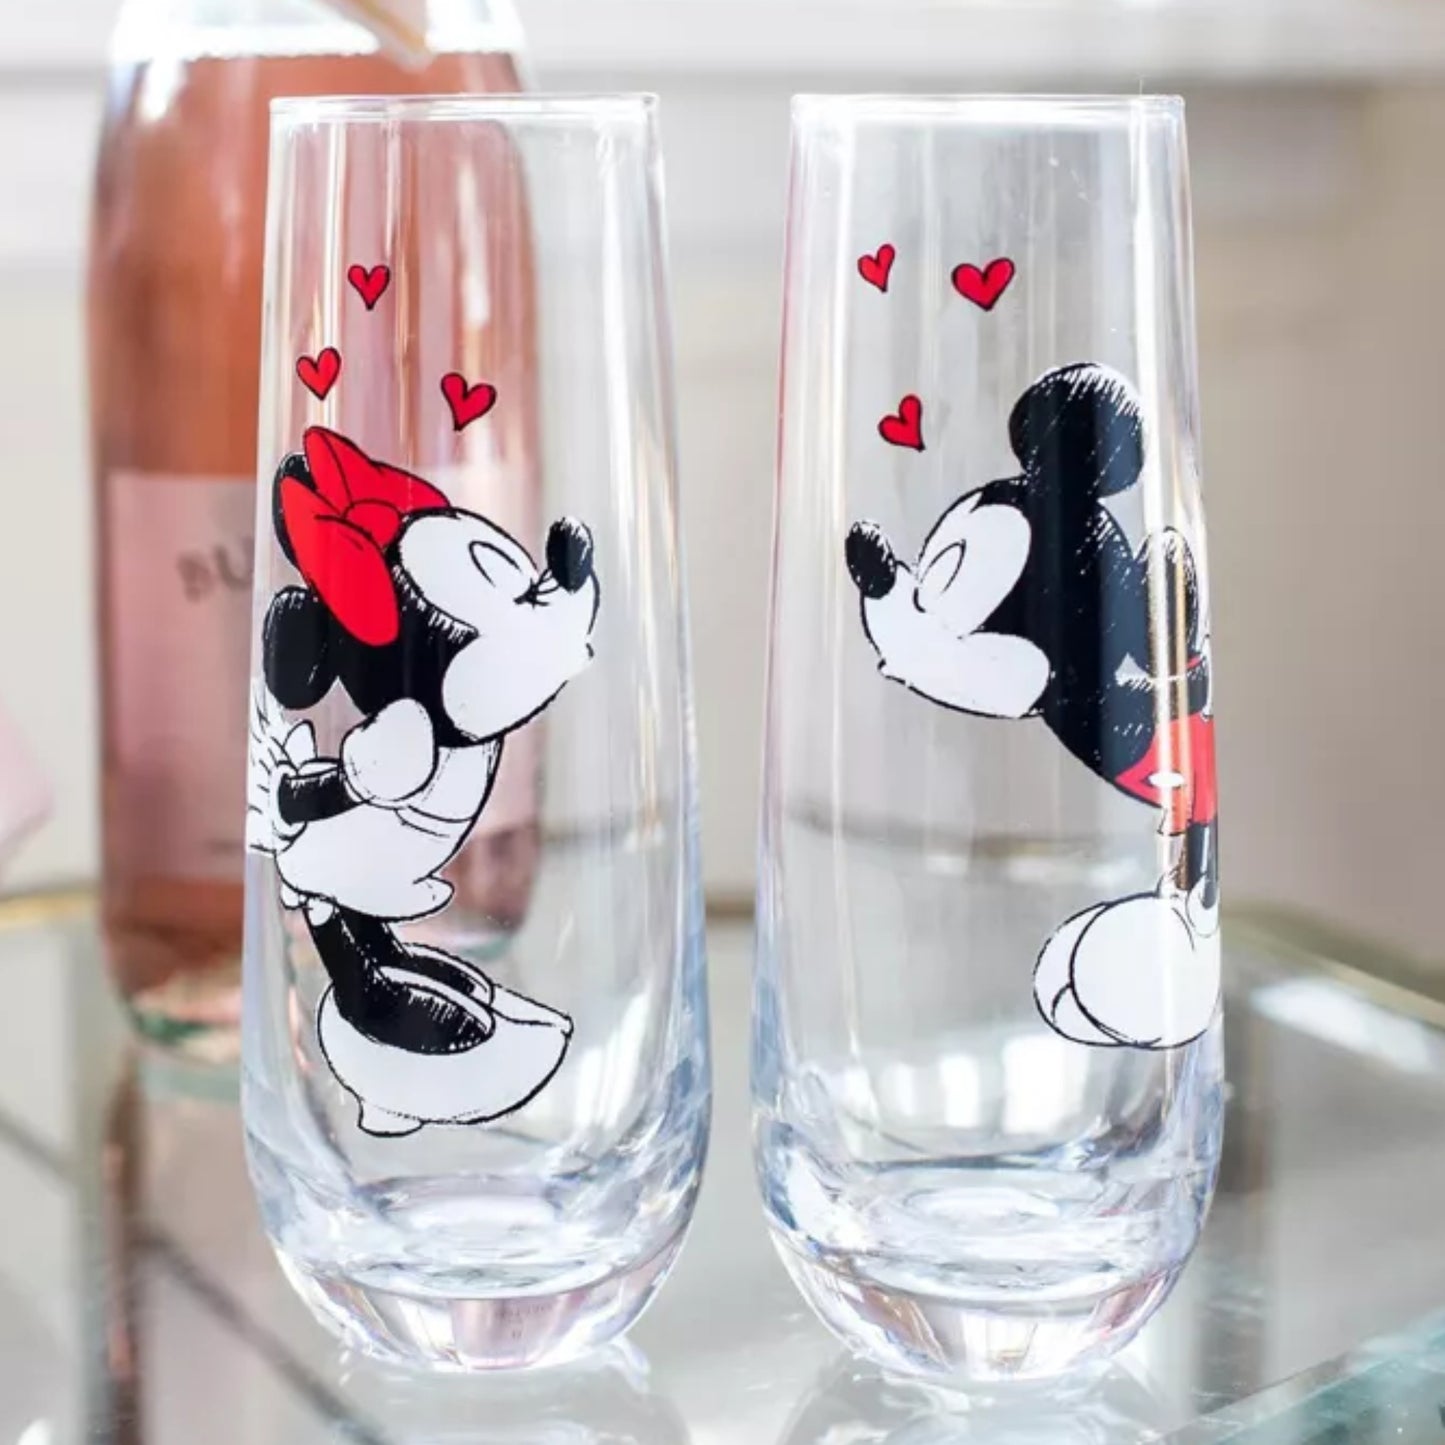 Mickey and Minnie Mouse Kissing Hearts (Disney) 9oz Fluted Glassware Set of 2